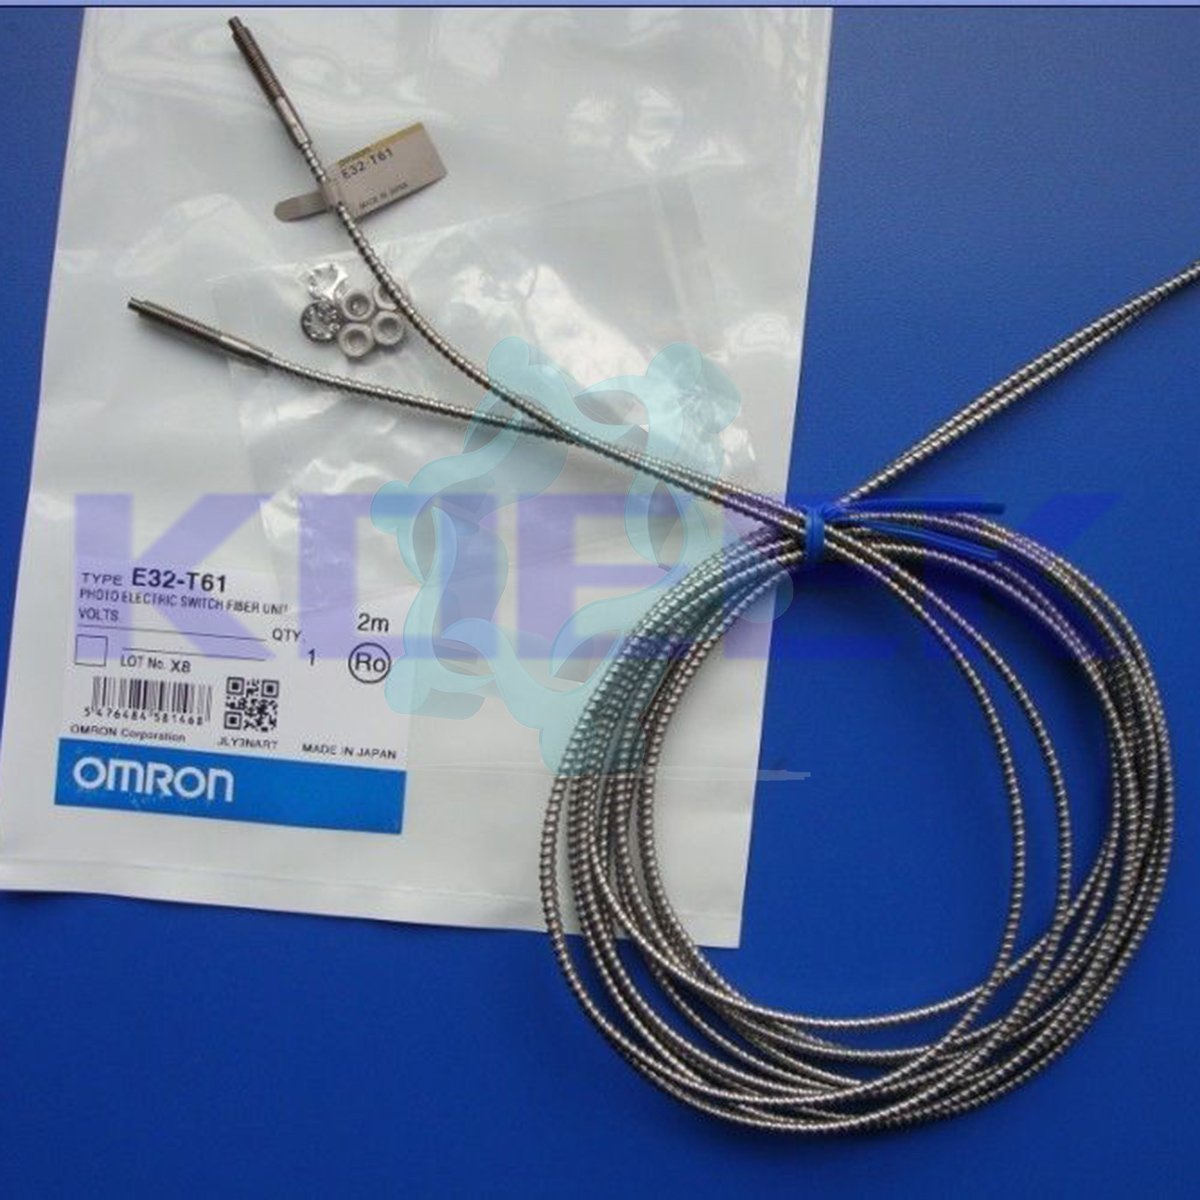 E32-T61 KOEED 1, 80%, import_2020_10_10_031751, Omron, Other